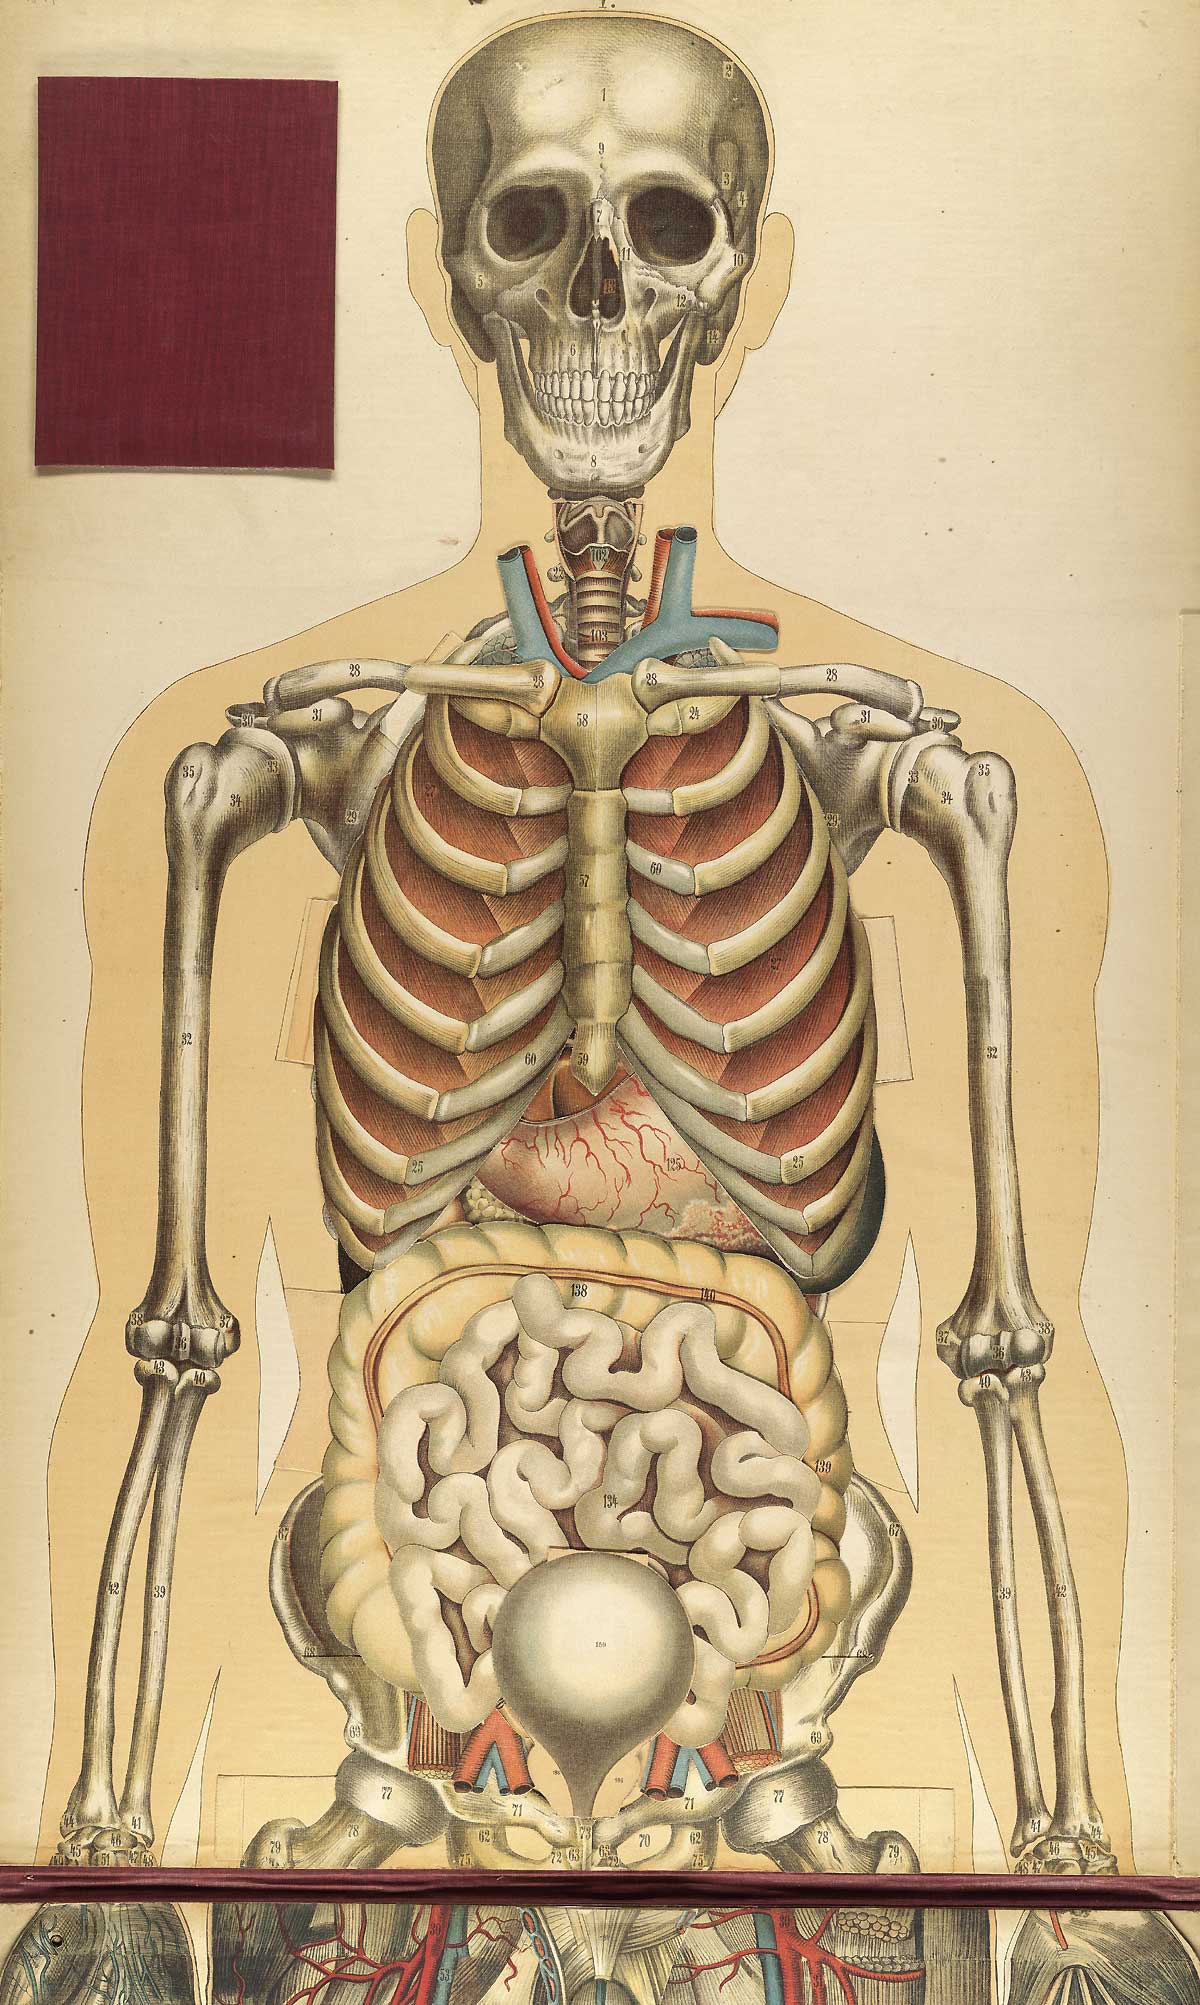 Chromolithograph showing the skeleton and internal organs of the upper half of the front of the human body, including the liver, intestines, lungs, and bladder, from Julien Bouglé’s Le corps humain en grandeur naturelle, NLM Call no. WE B758c 1899.